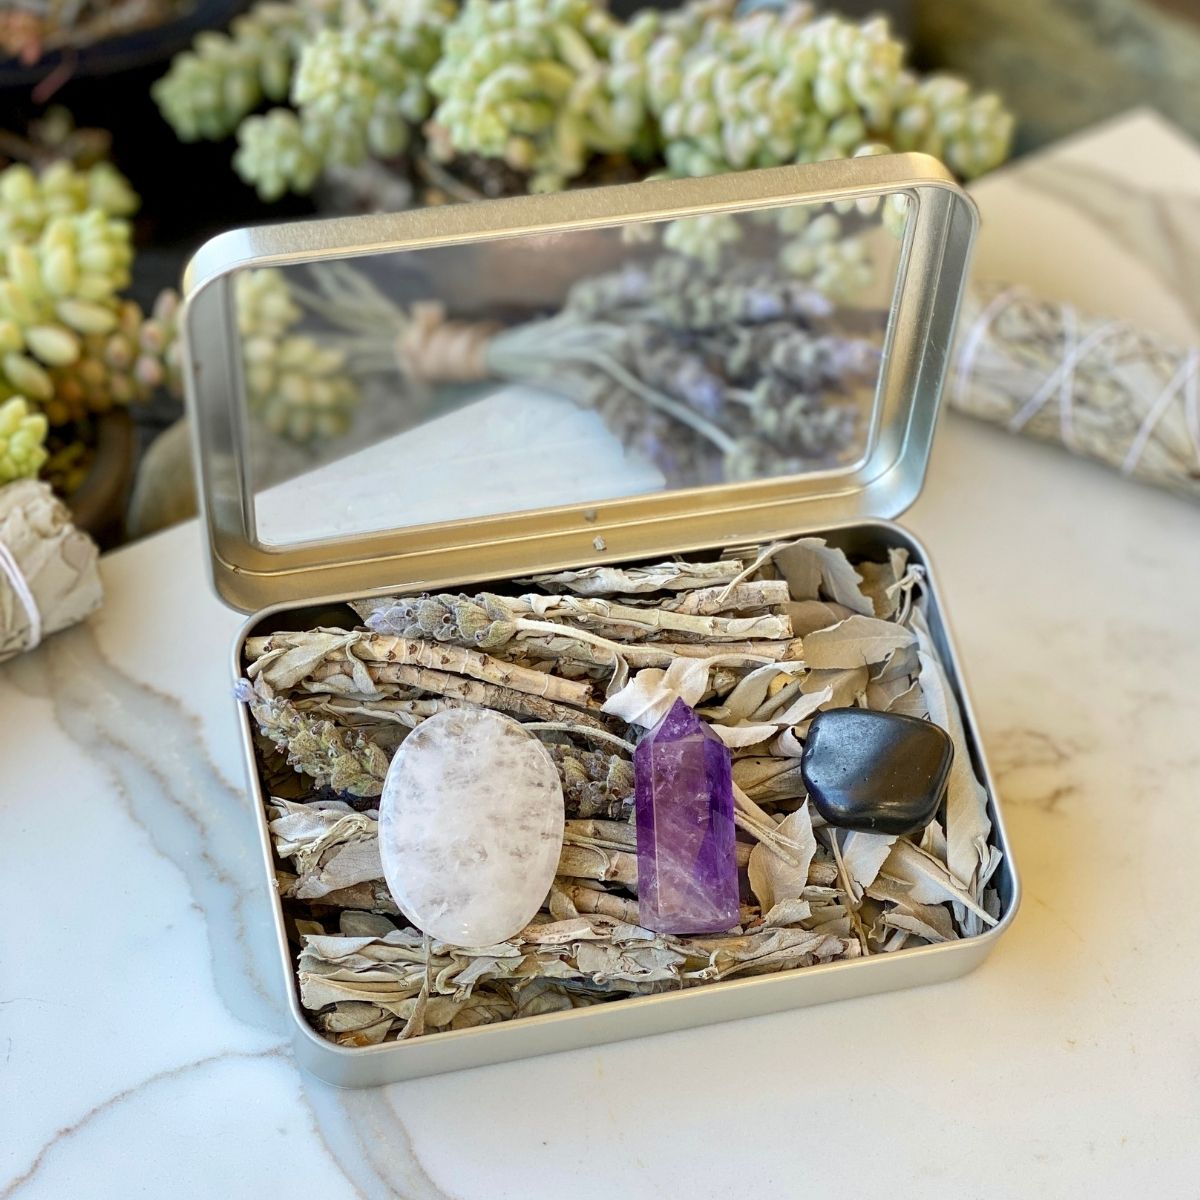 Unwind, Cleanse and Recharge your crystals, life & space with our new Ceremony Set: Amethyst Tower, Shungite, Quartz Crystal Worry Stone and California White Sage Smudge with a hint of Lavender.